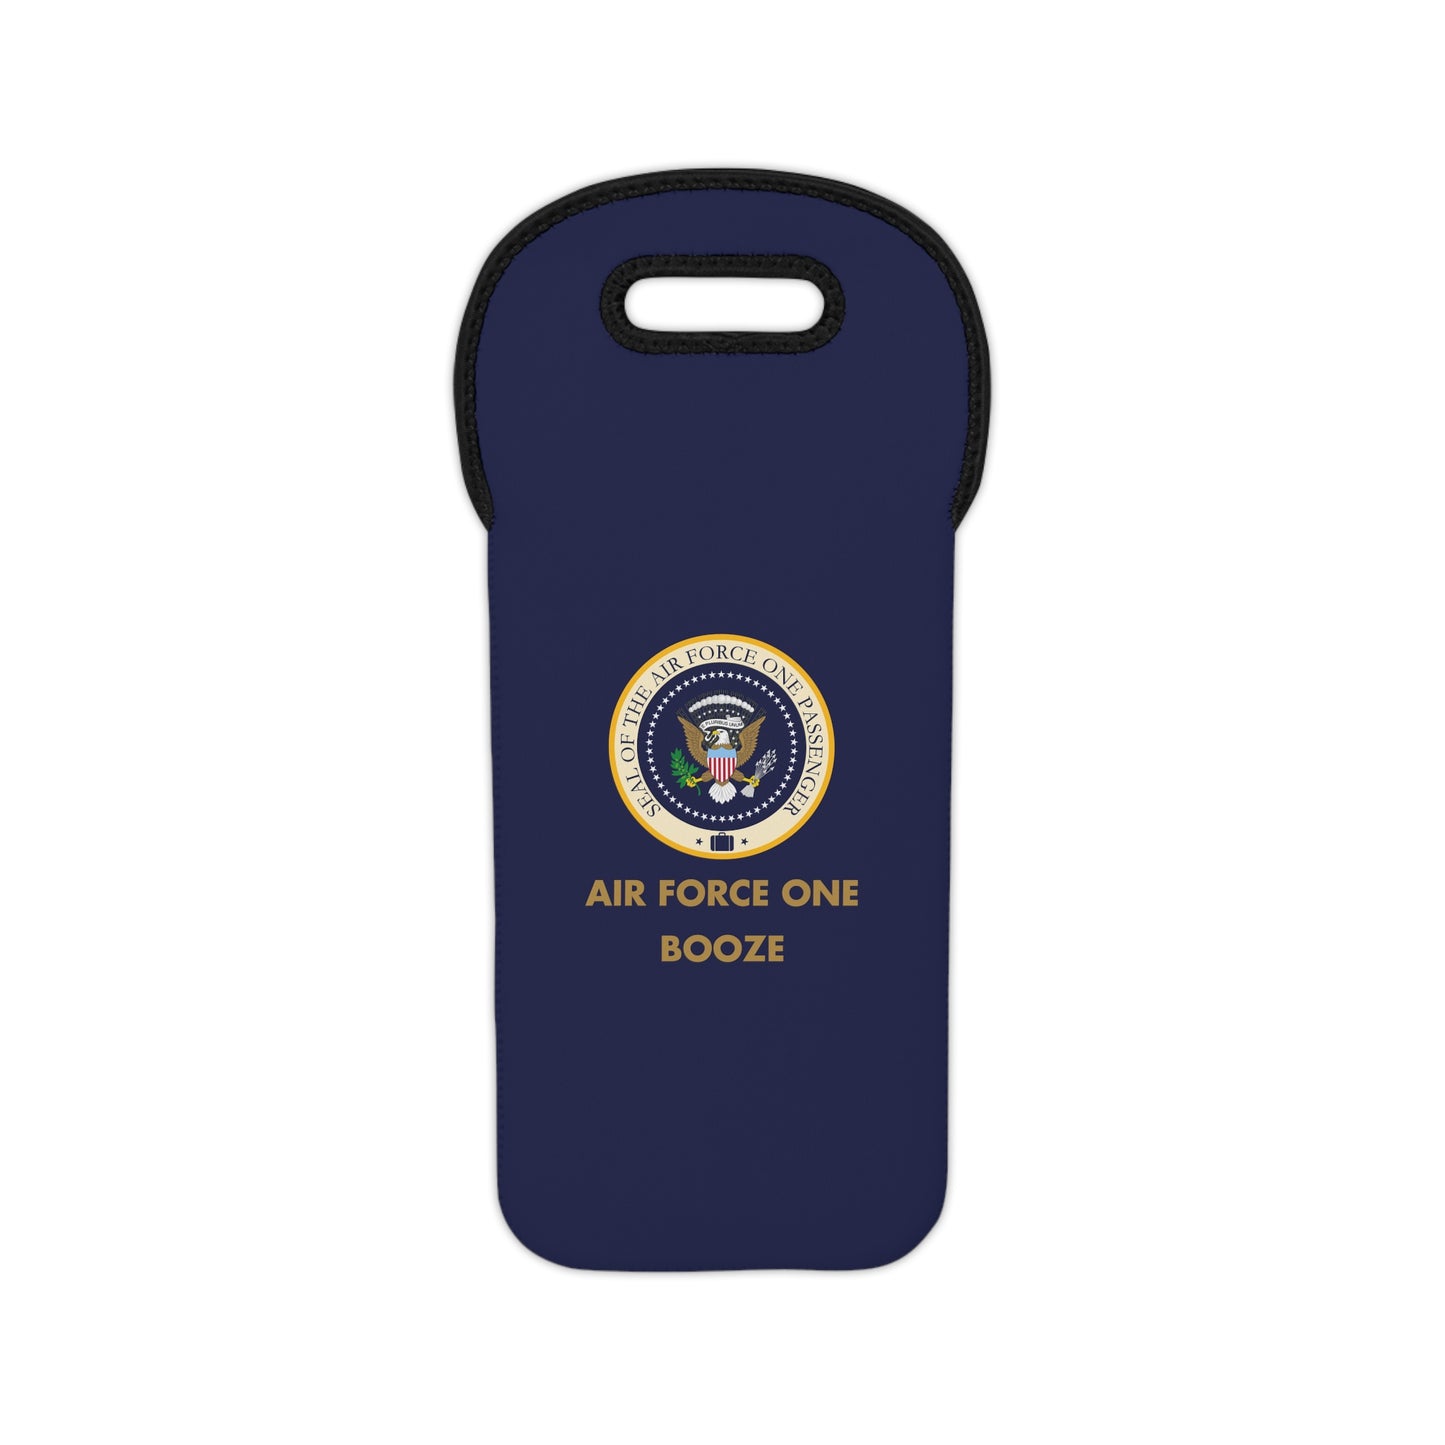 Air Force One Booze: Presidential Emblem Wine Tote Bag